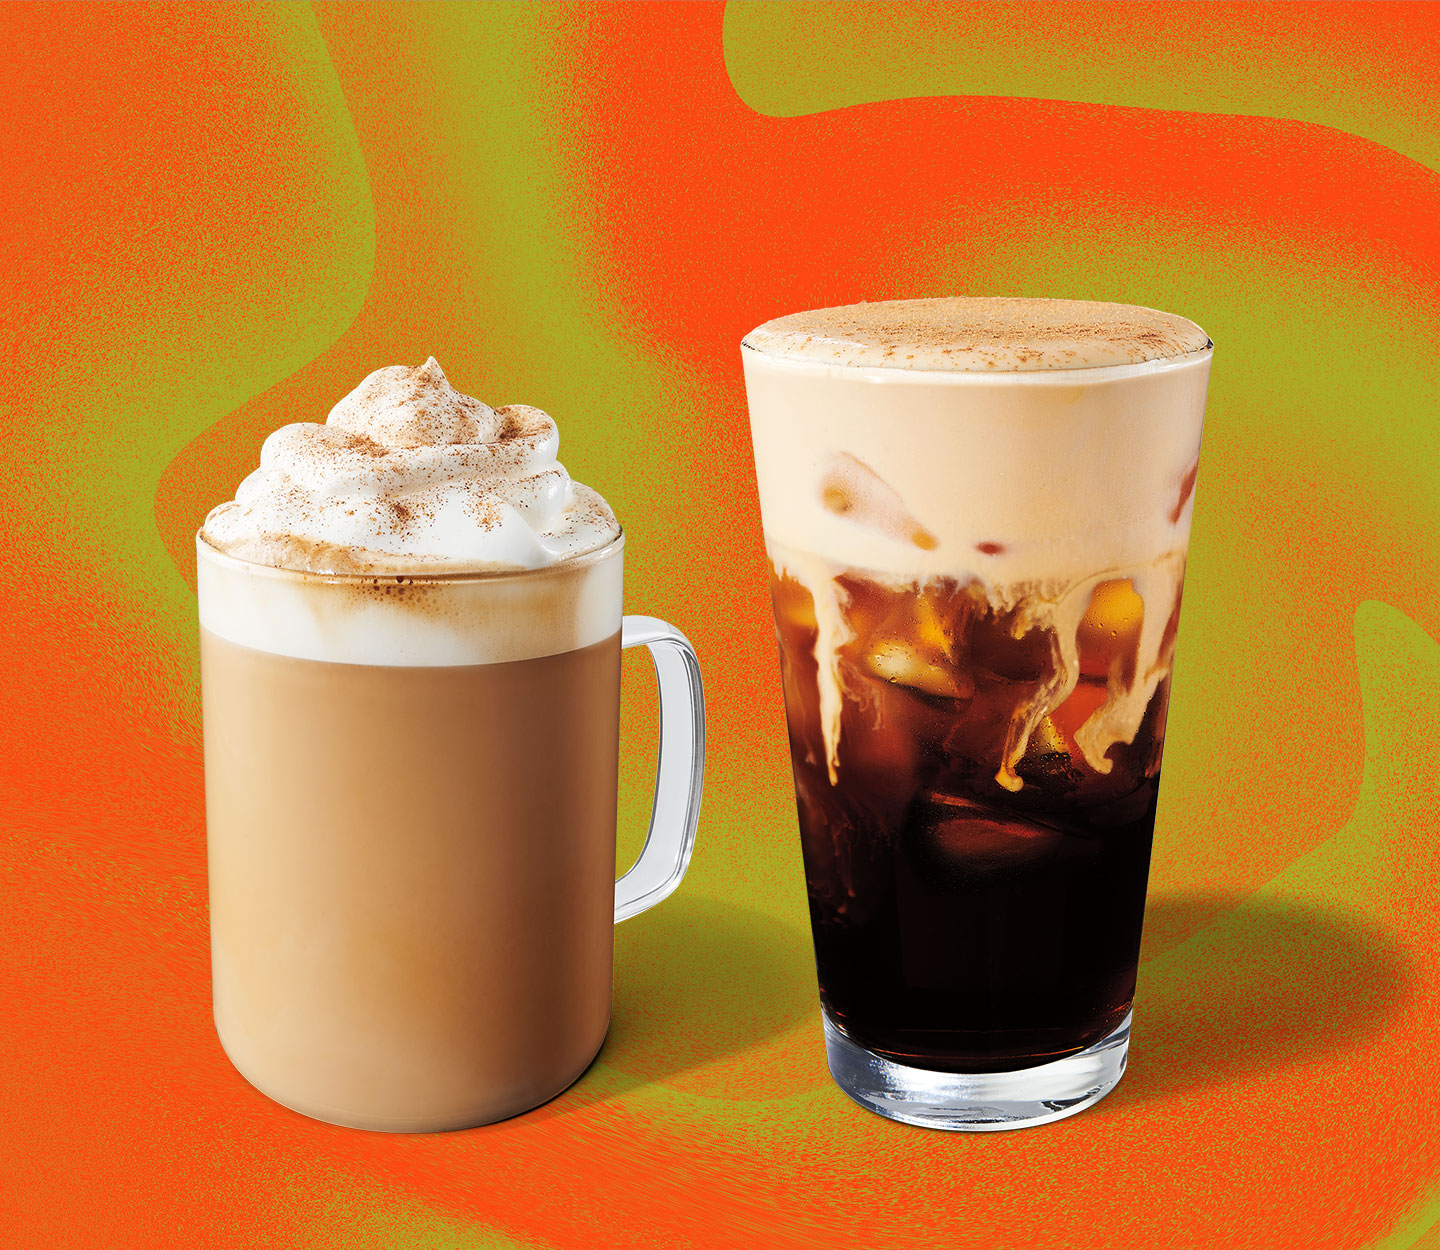 A coffee drink with whip cream topping in a clear mug next to a marbled coffee drink in a tall, clear glass with thick foam topping.